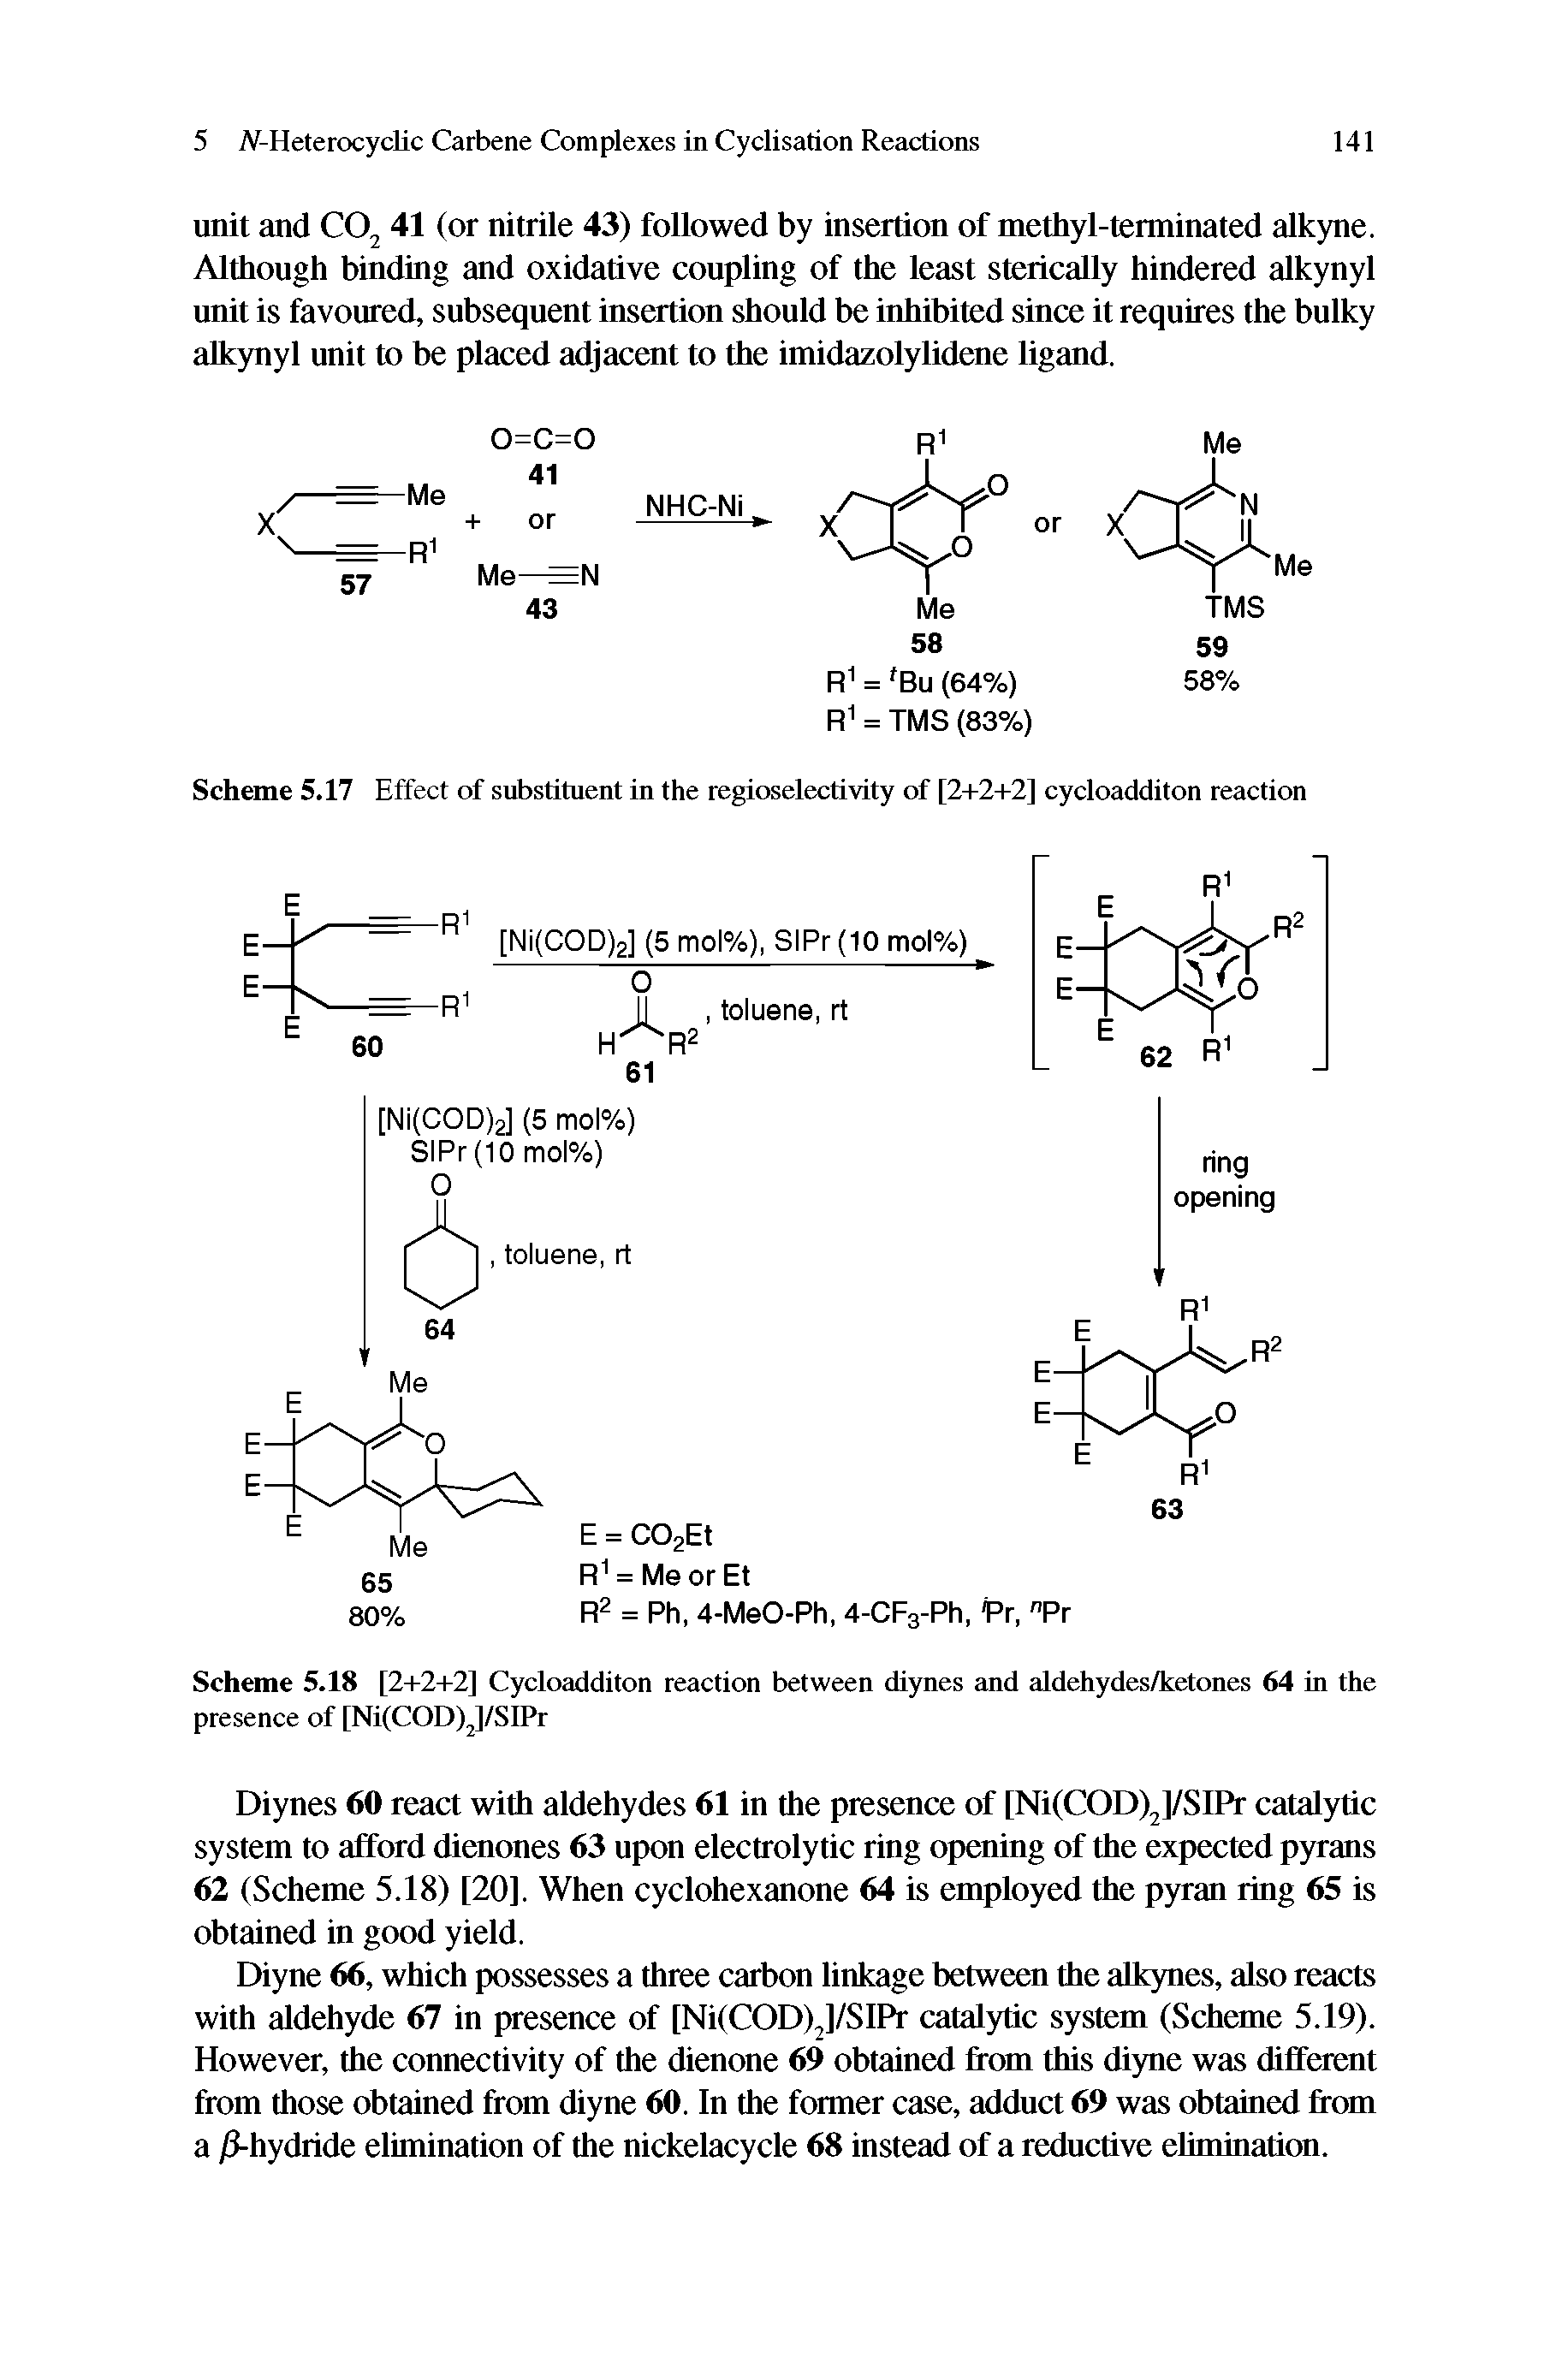 Scheme 5.18 [2+2+2] Cycloadditon reaction between diynes and aldehydes/ketones 64 in the presence of [Ni(COD)J/SIPr...